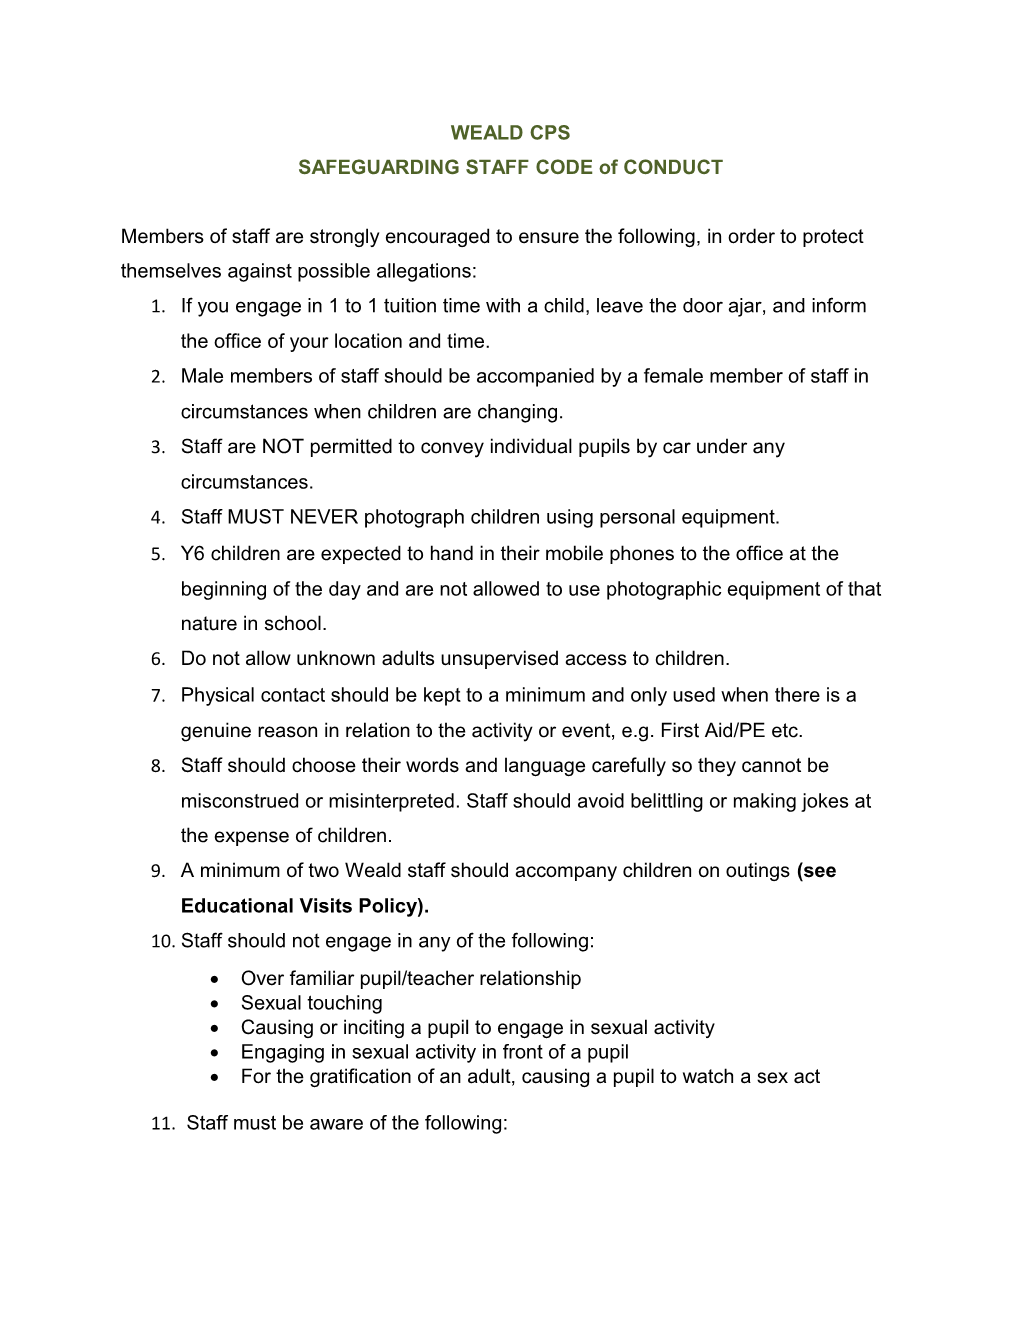 SAFEGUARDING STAFF CODE of CONDUCT